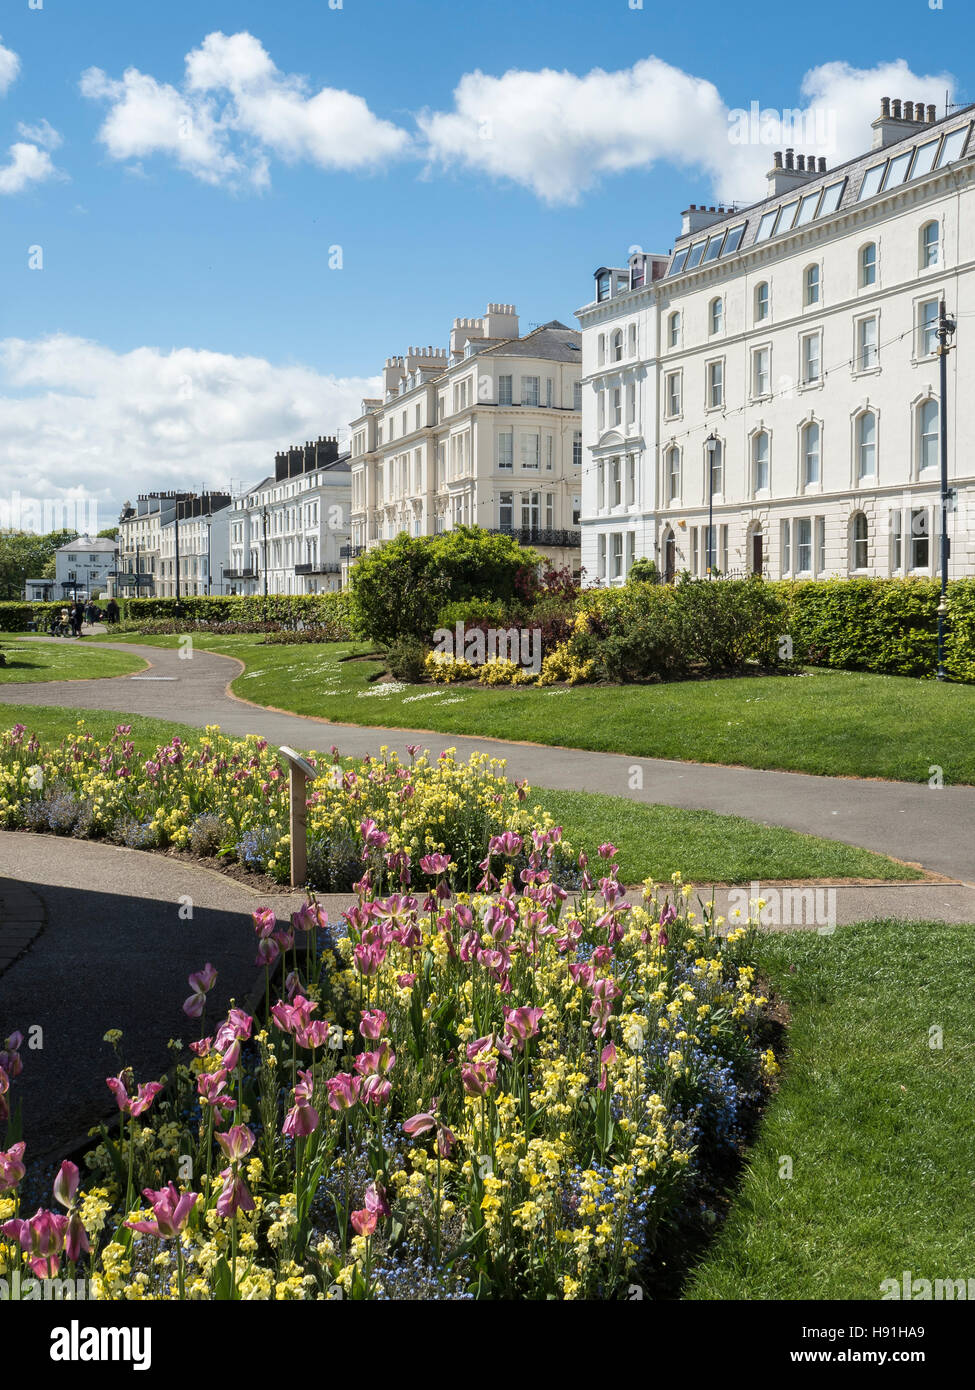 Royal Crescent, Filey, North Yorkshire im Bezirk in Scarborough. Stockfoto